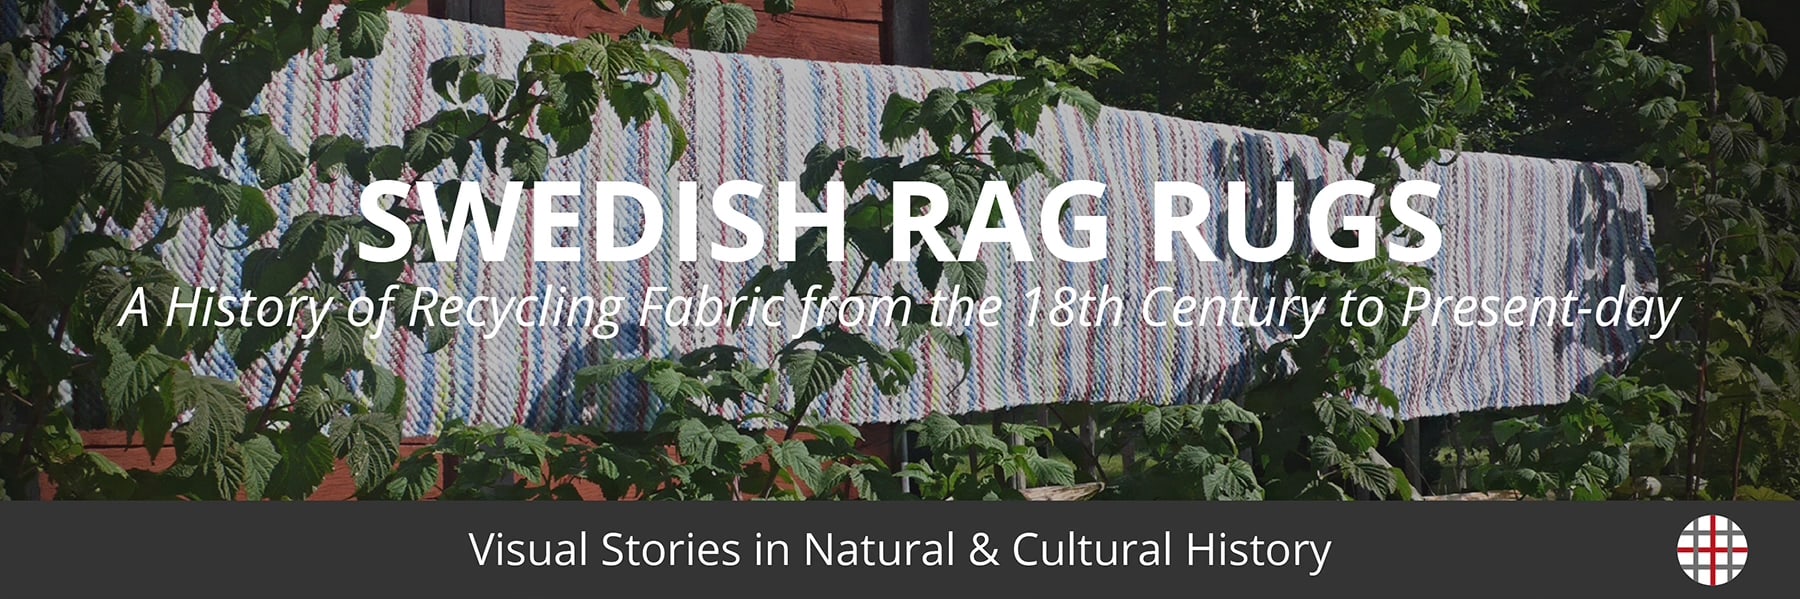 Swedish Rag Rugs - a History of Recycling Fabric from the 18th Century to Present Day